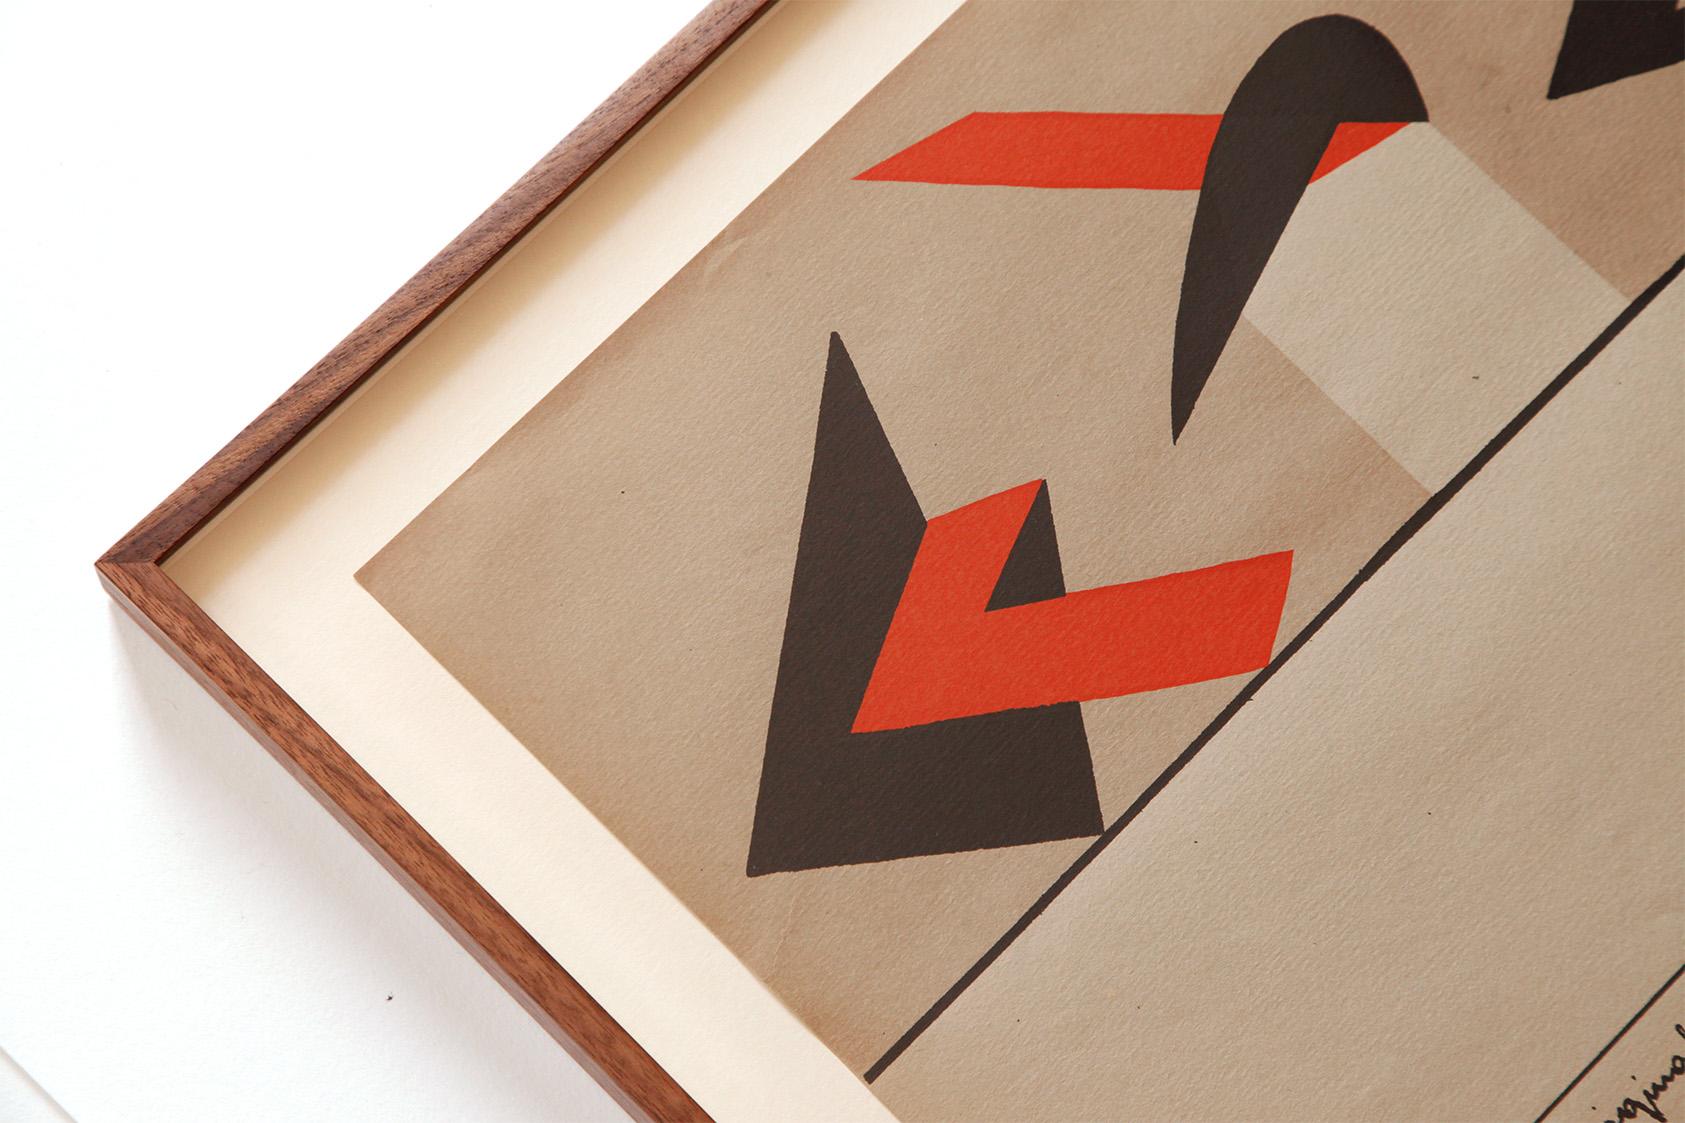 A historic Constructivist screenprint in a museum-grade frame.

Screenprint made by Peter László Péri in 1923 for the Great Berlin Art Exhibition. It represents three large space constructions. This print features in major art collections, including